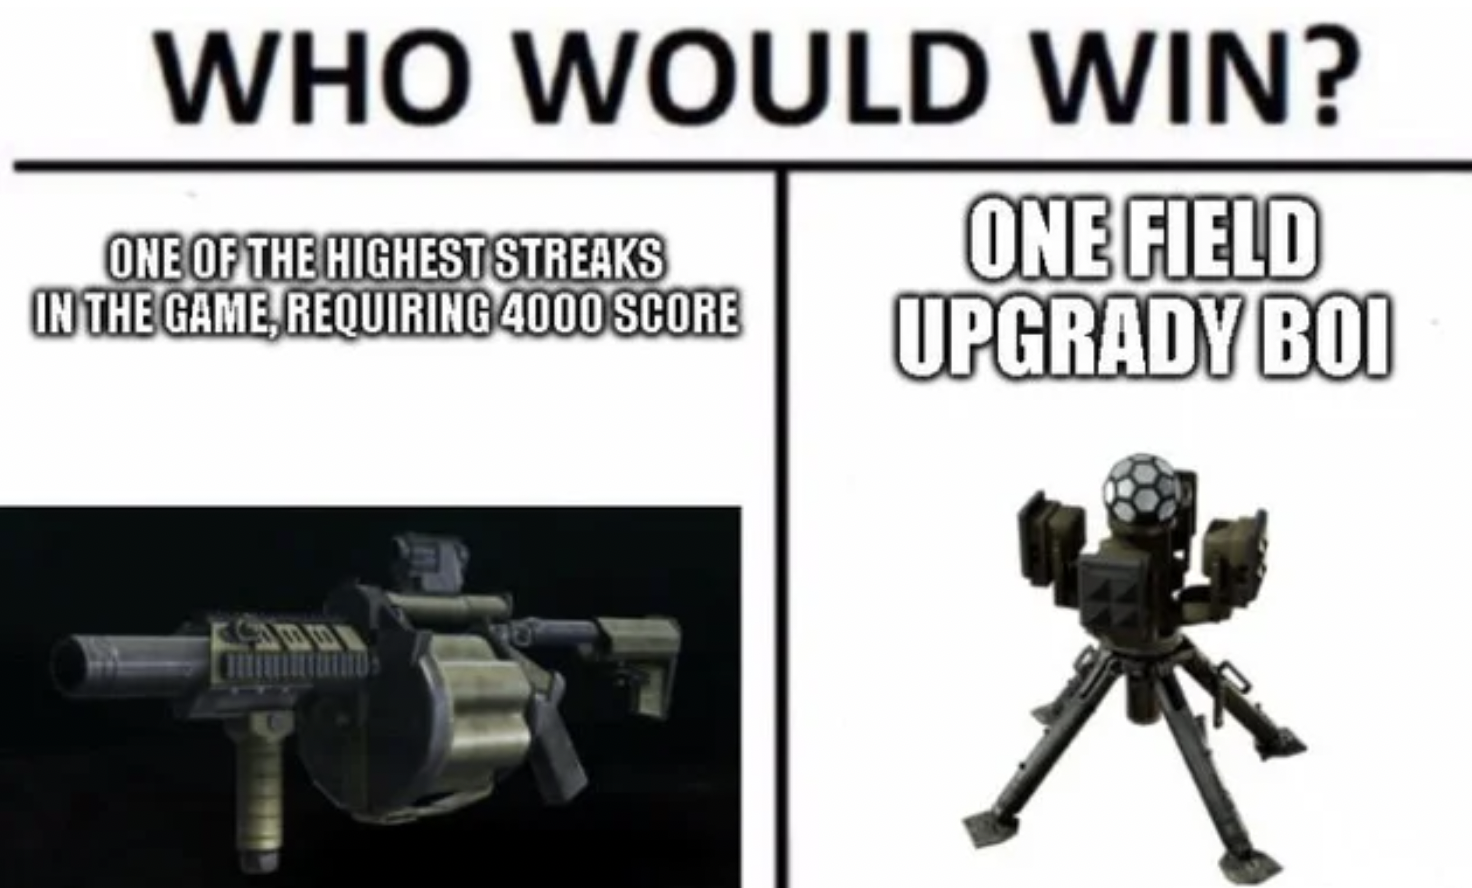 Call of Duty Memes - would win meme war - Who Would Win? One Field Upgrady Boi One Of The Highest Streaks In The Game,